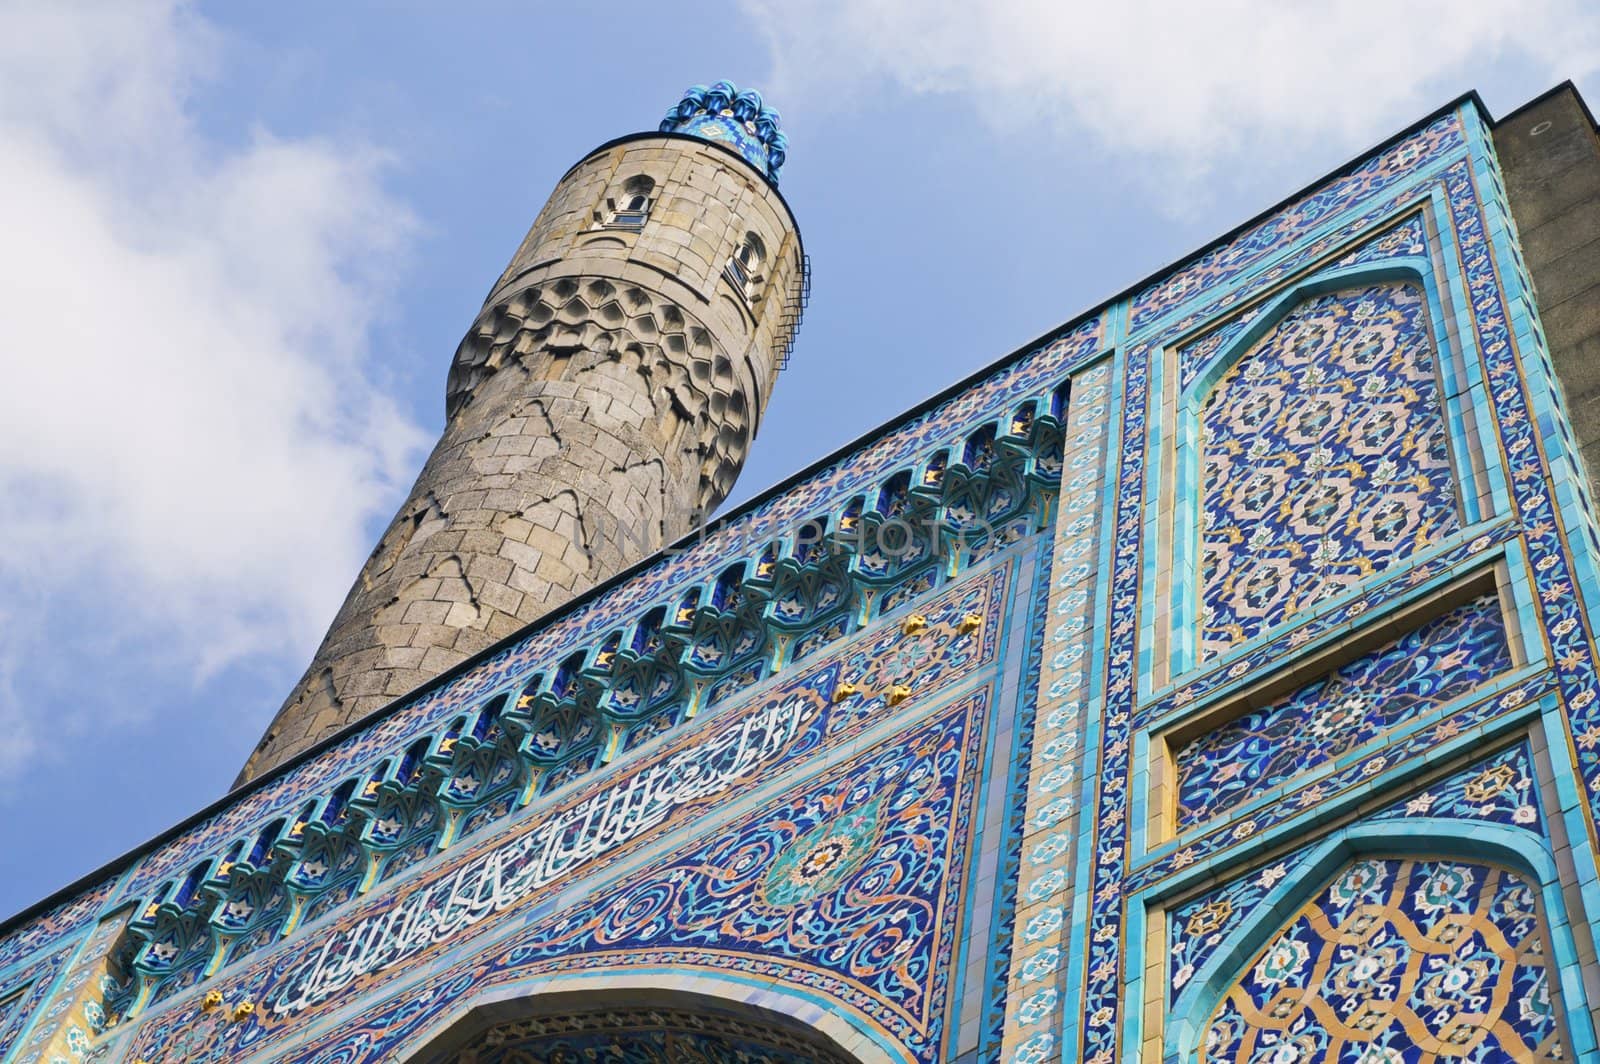 The minaret and the front wall with Arabic mosaics of the ancient mosque in Saint Petersburg, Russia.